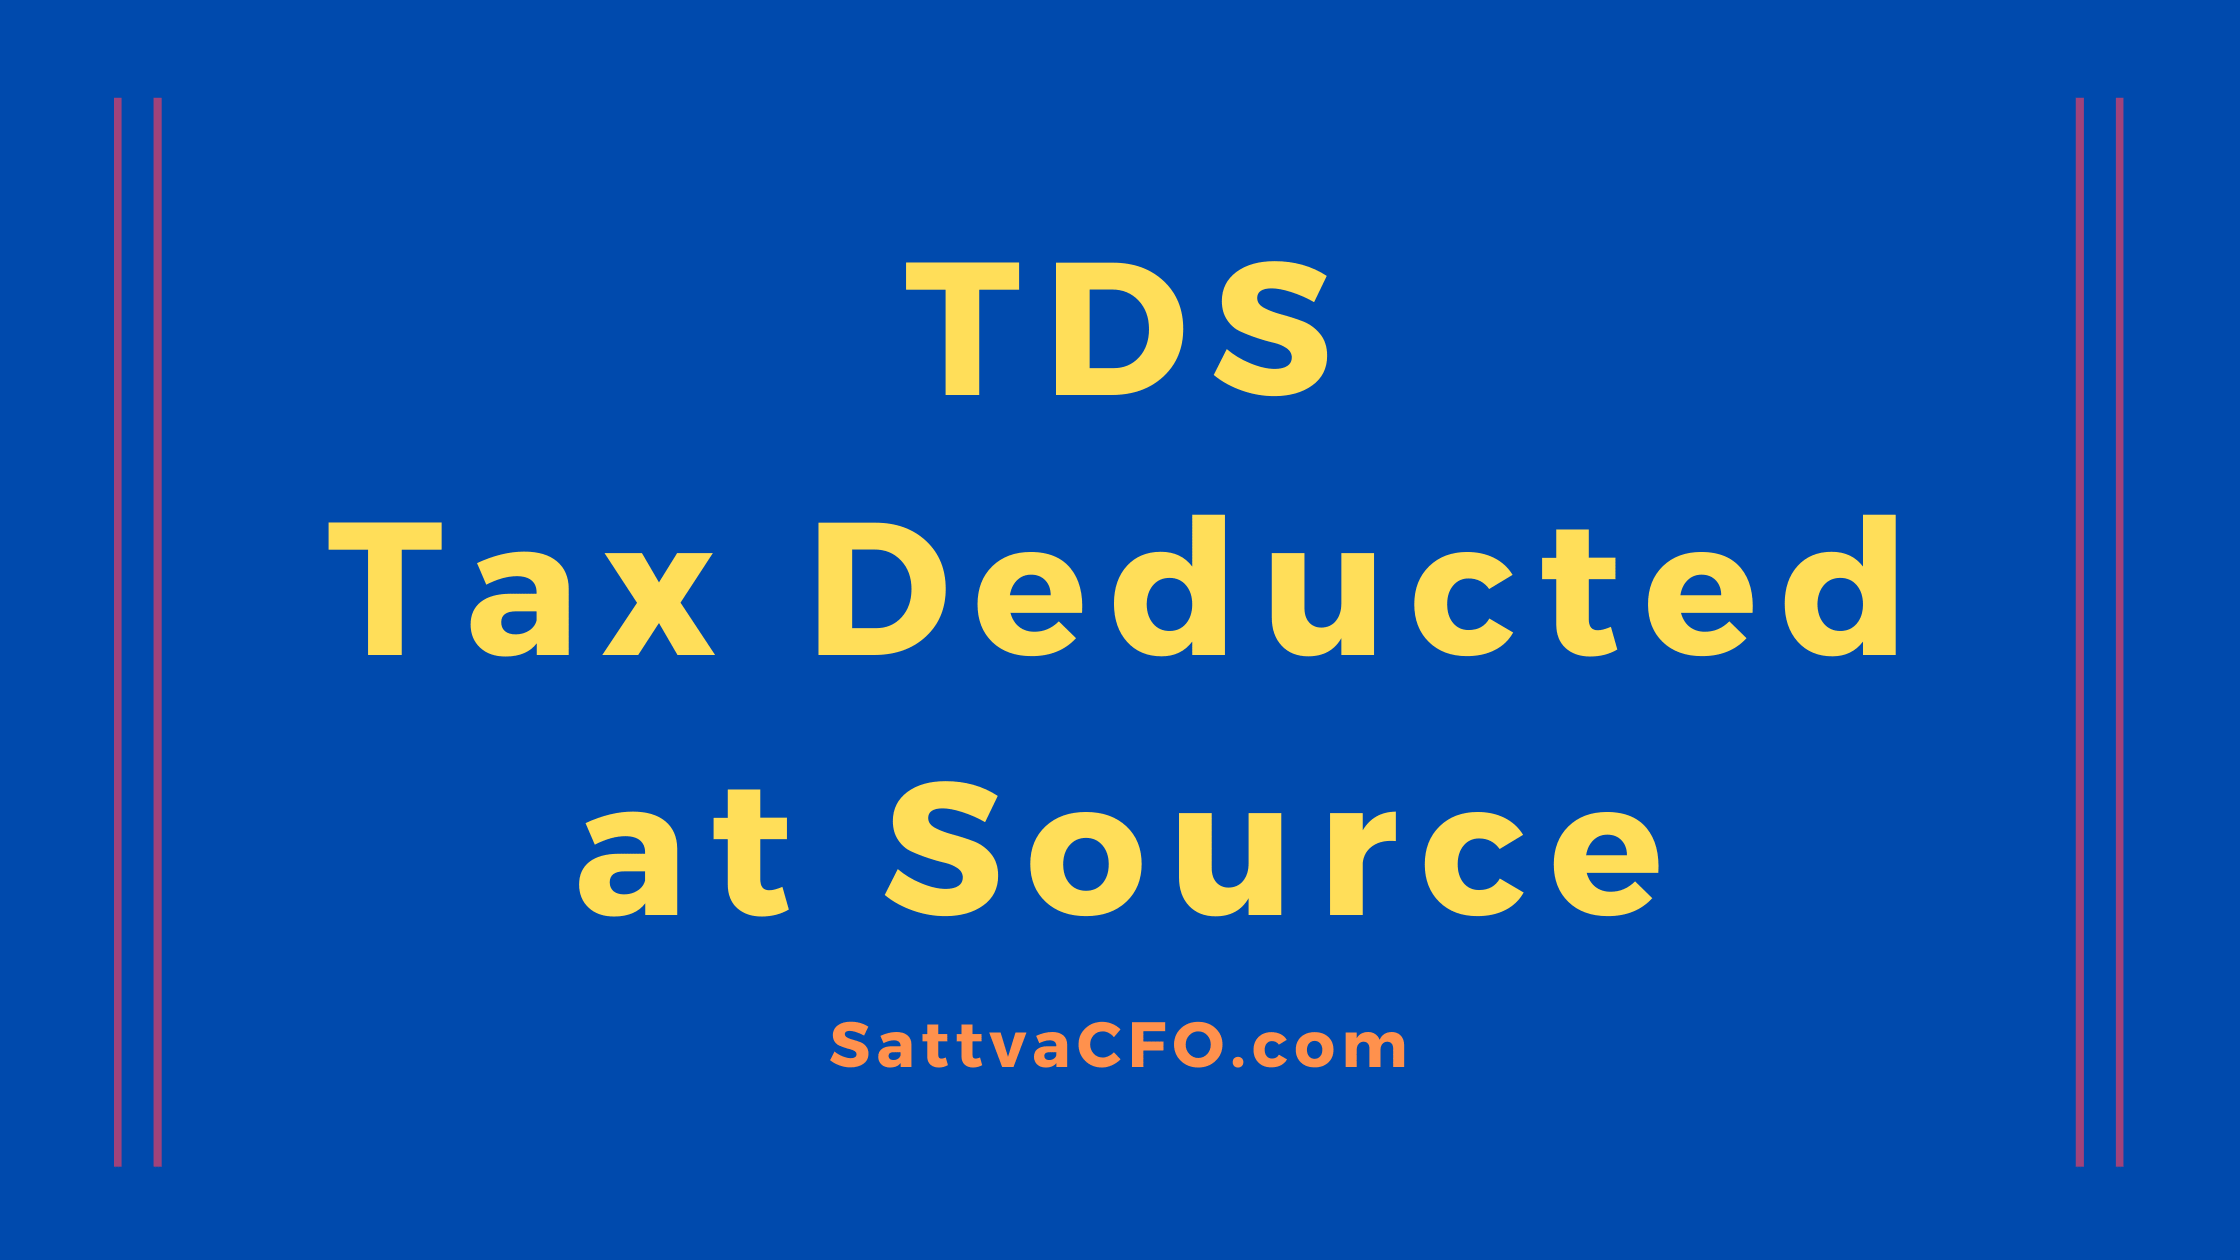 Tax Deducted at Source - TDS